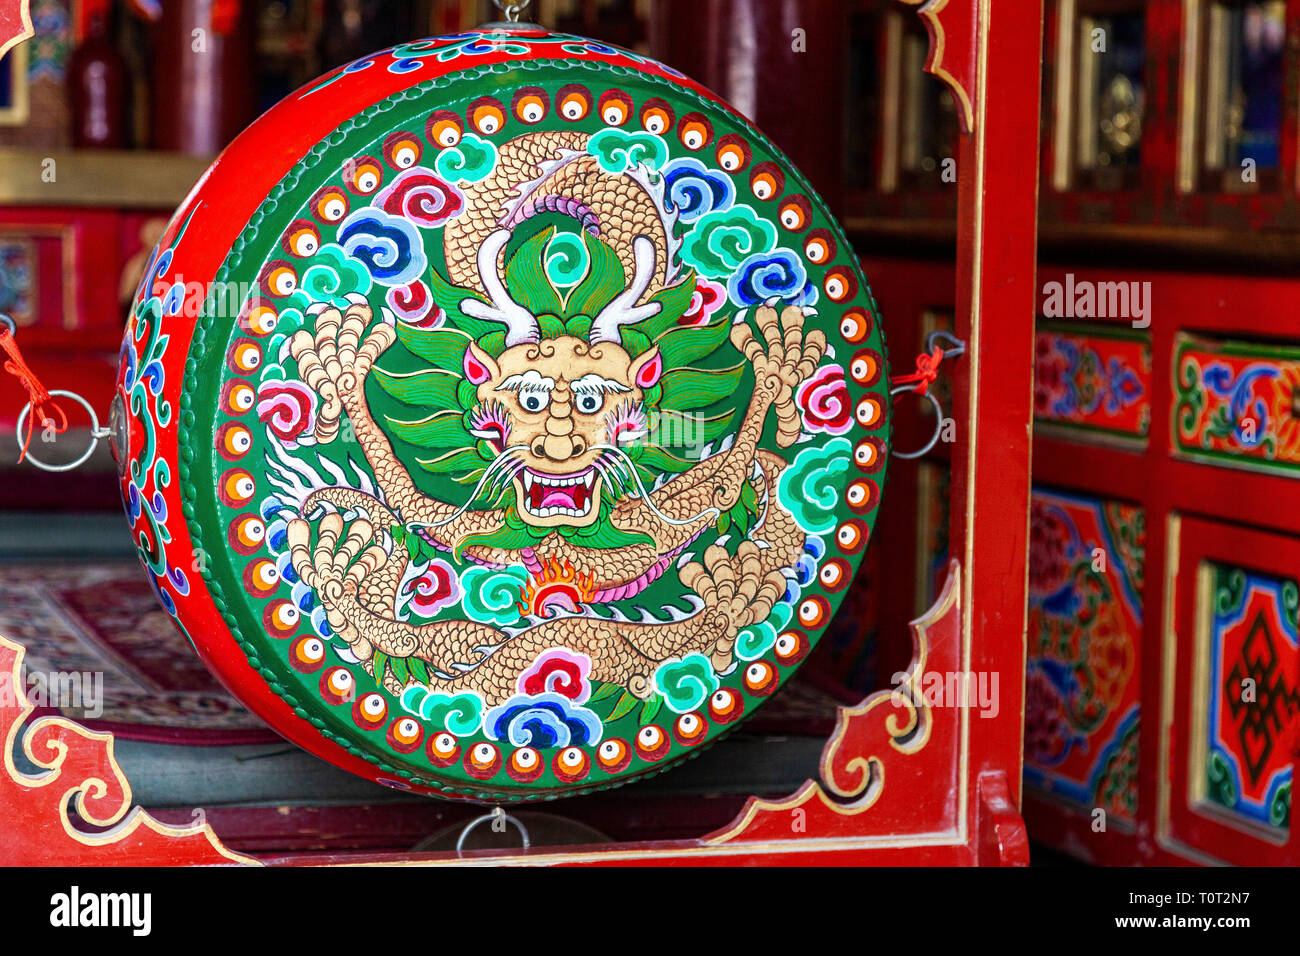 Drum in Dazhao Lamaist Buddhist temple in Hohhot, capital of Inner Mongolia. The main hall is a lamasery combining both Tibetan and Han architecture. Stock Photo